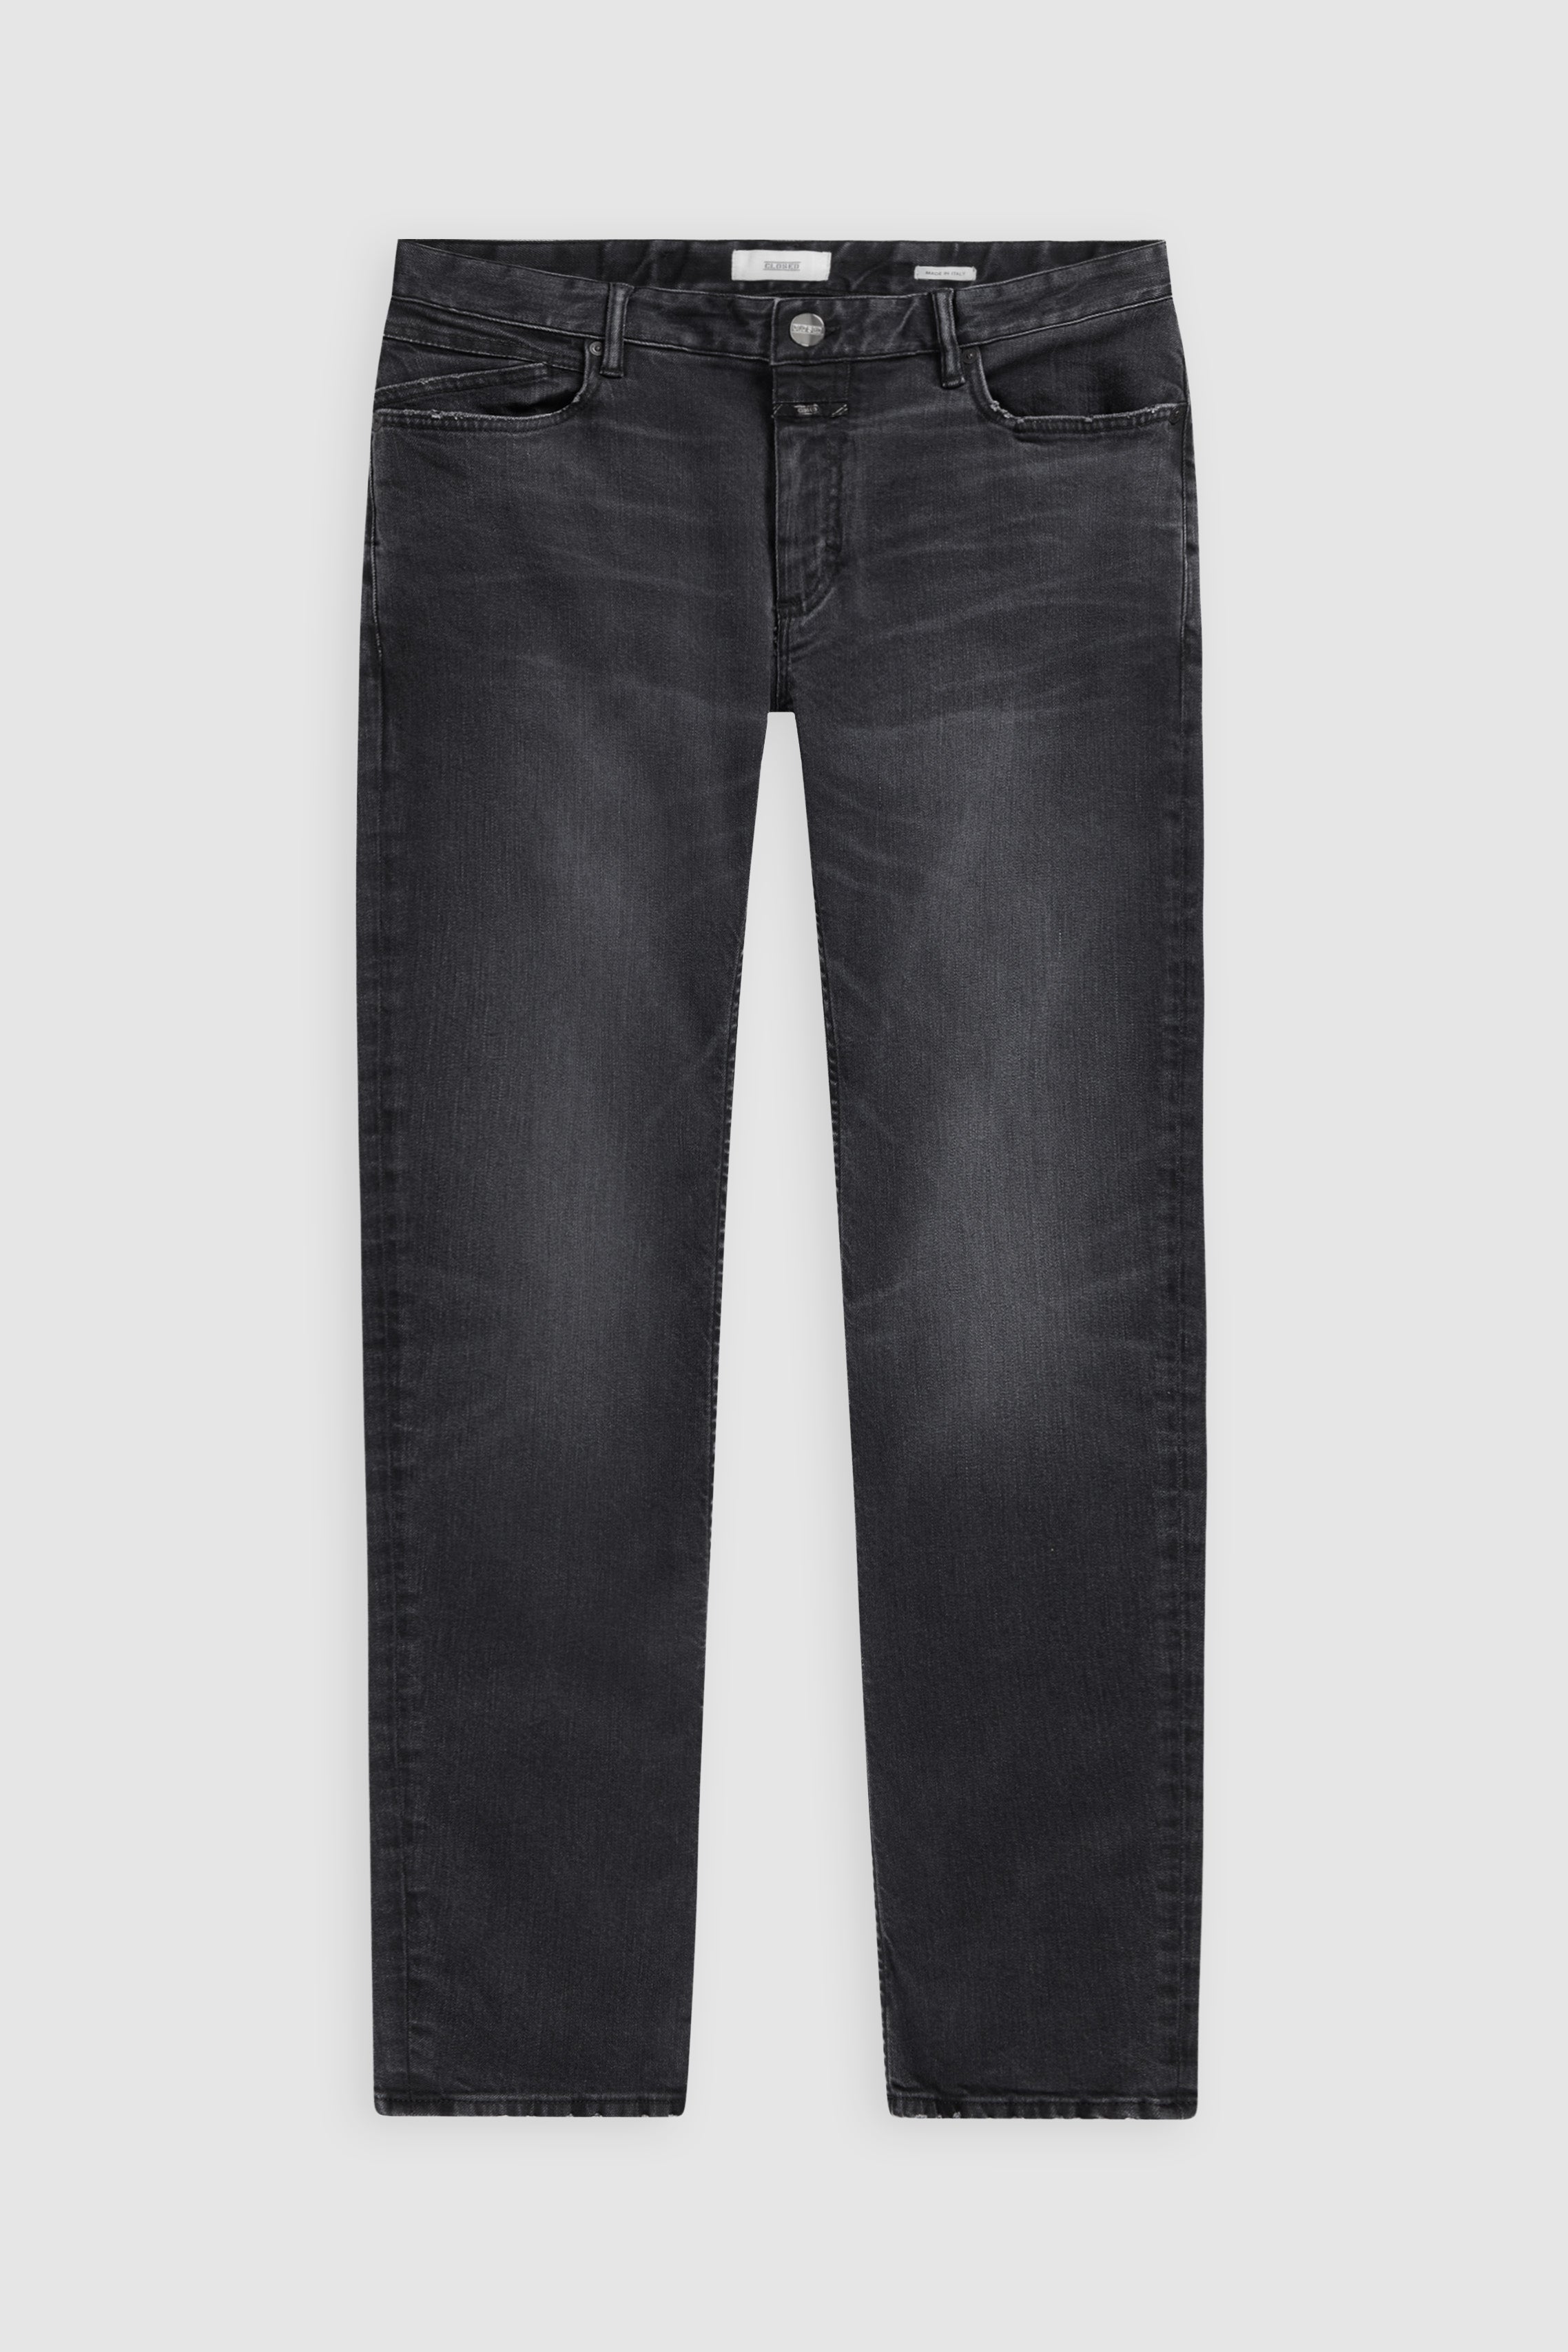 STYLE NAME UNITY SLIM JEANS